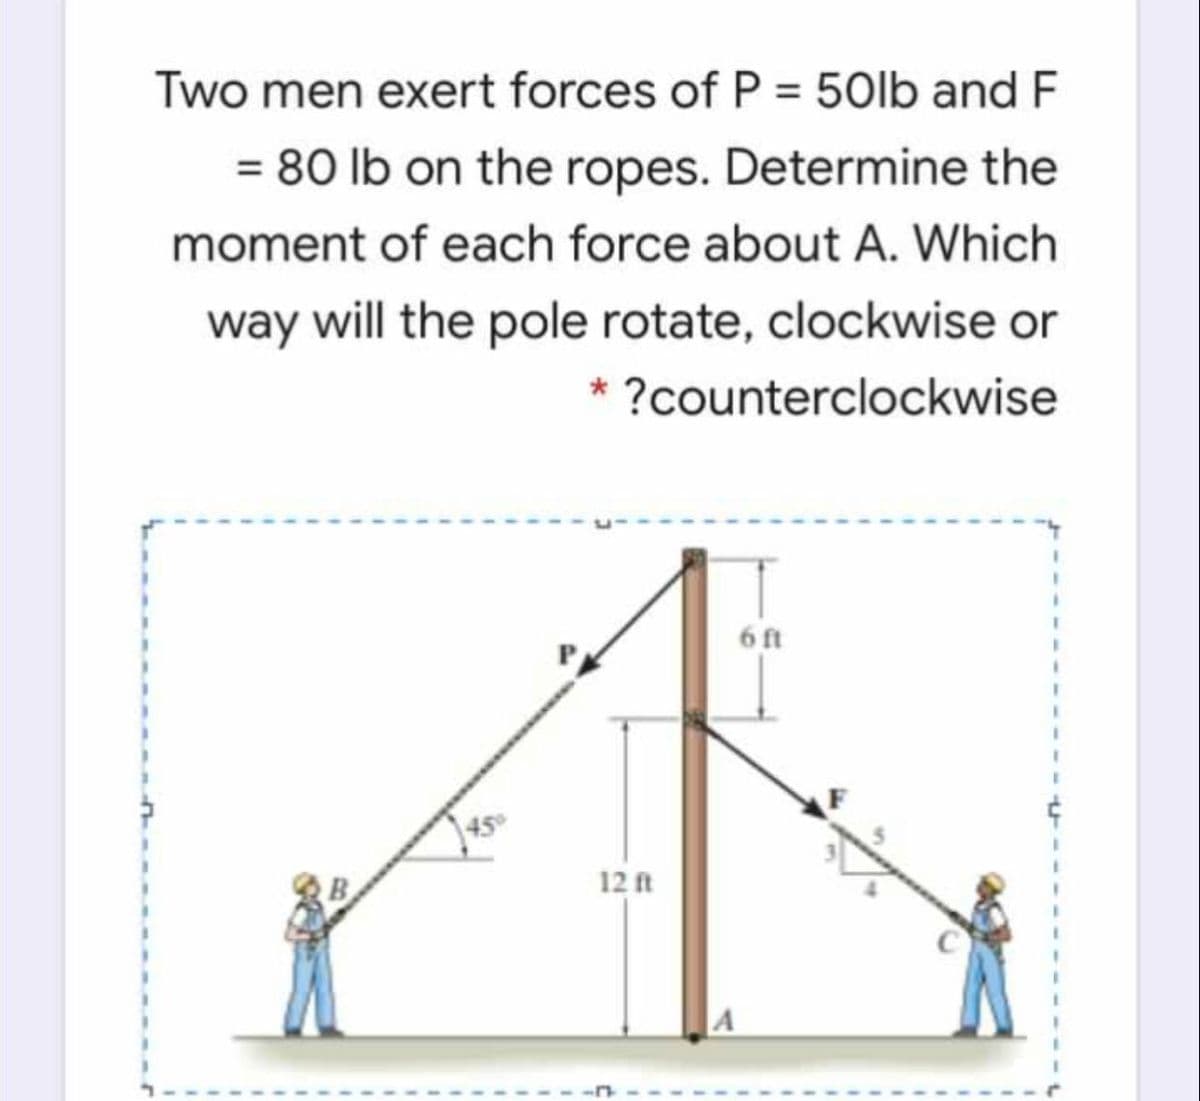 Two men exert forces of P = 50lb and F
= 80 lb on the ropes. Determine the
moment of each force about A. Which
way will the pole rotate, clockwise or
* ?counterclockwise
6 ft
45
12 ft
